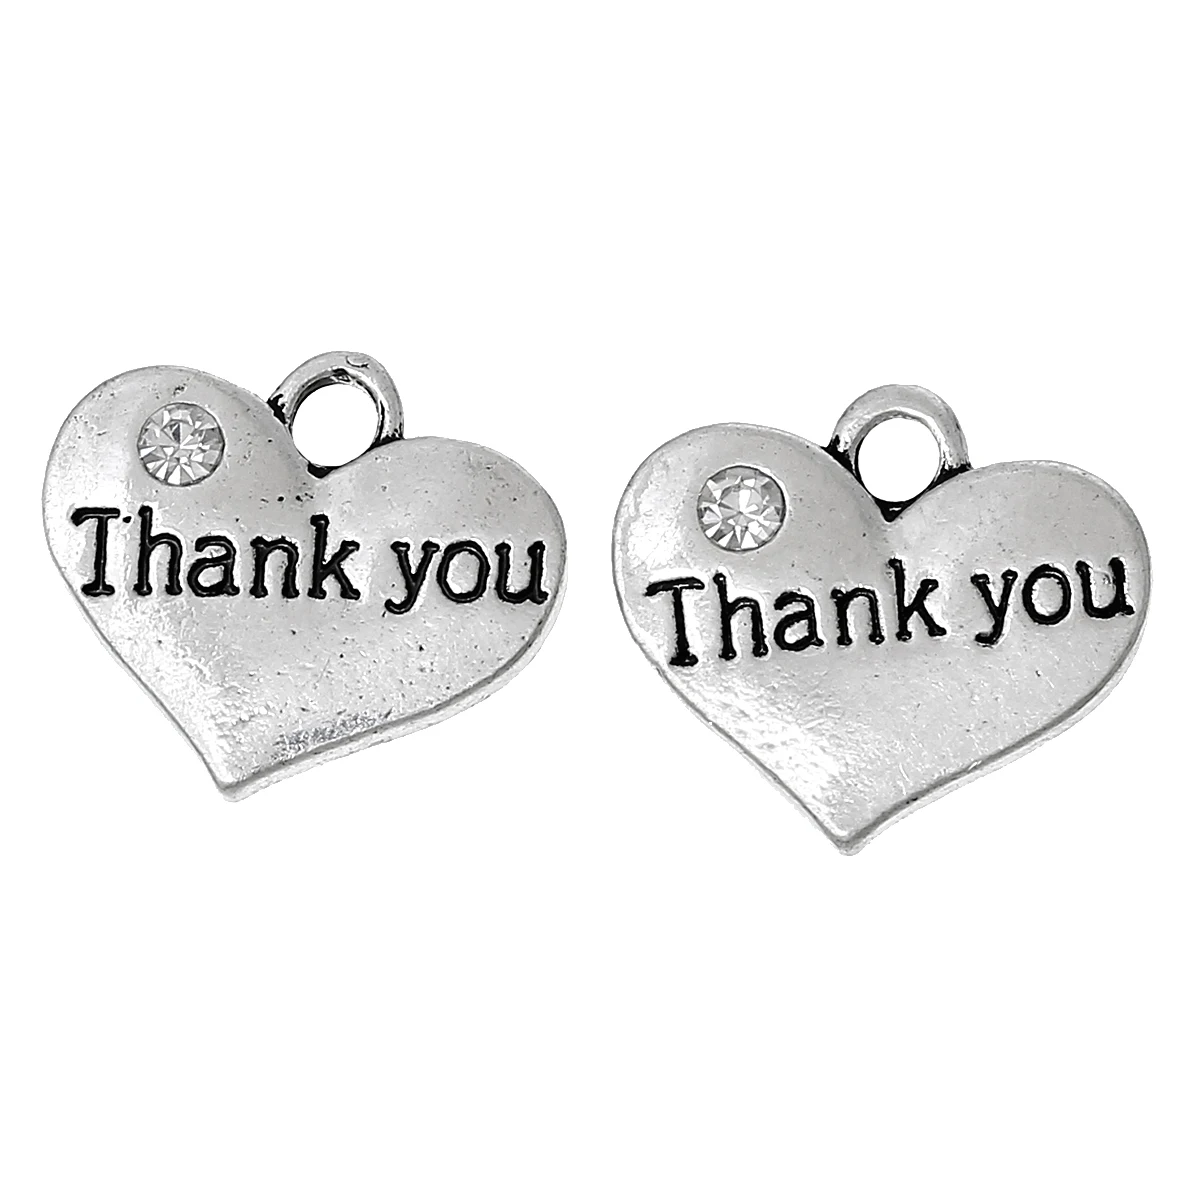 

Doreen Box Handmade Charm Heart Antique Silver Color Message "Thank You" Carved Rhinestone Pendants DIY Making Necklace Jewelry